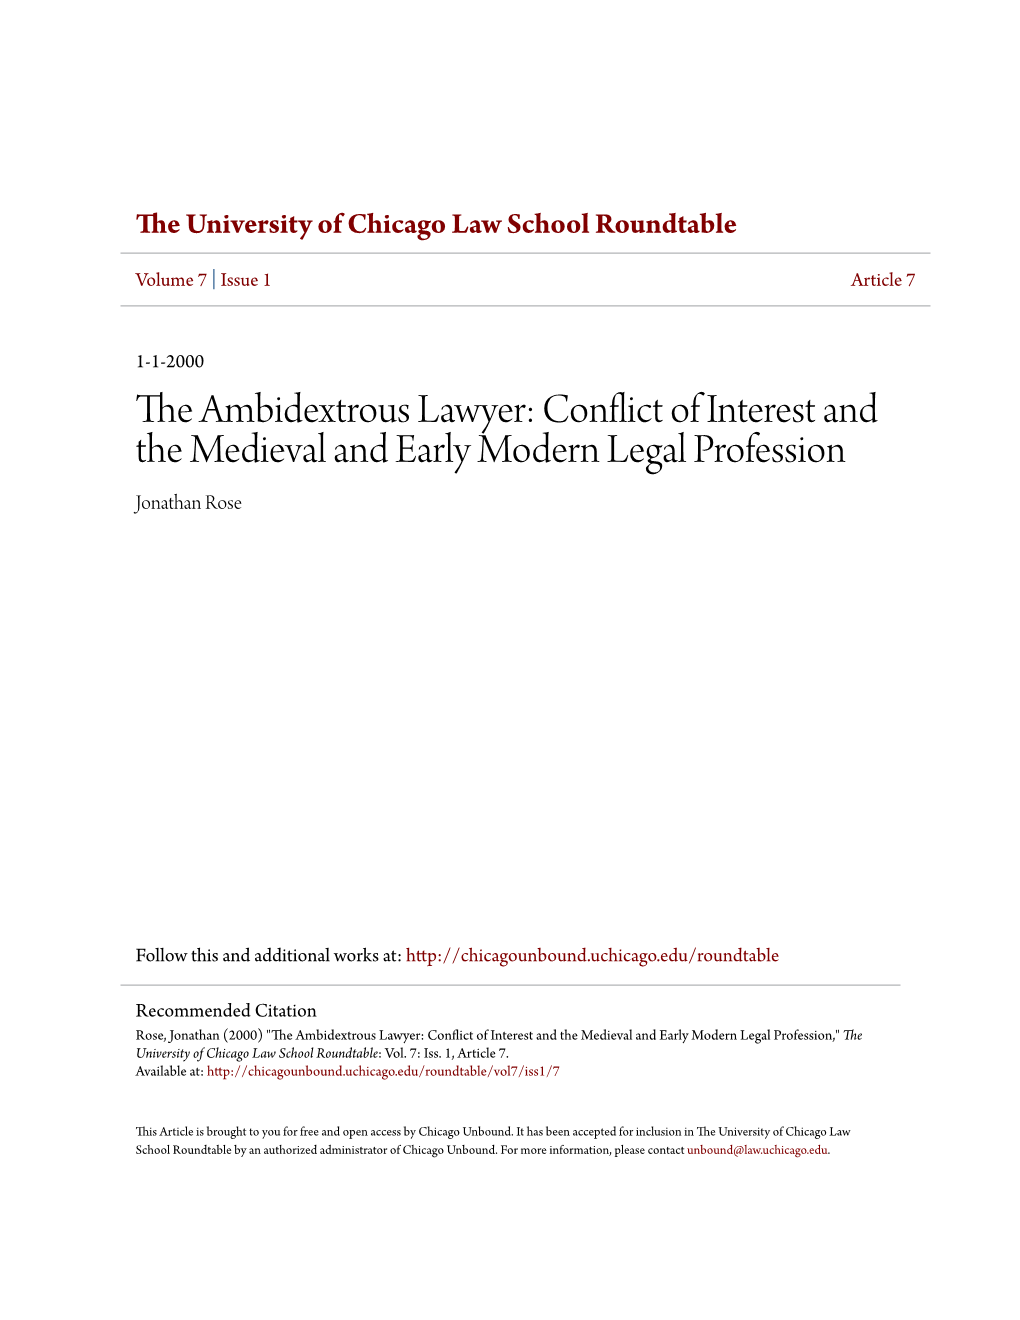 The Ambidextrous Lawyer: Conflict of Interest and the Medieval and Early Modern Legal Profession Jonathan Rose